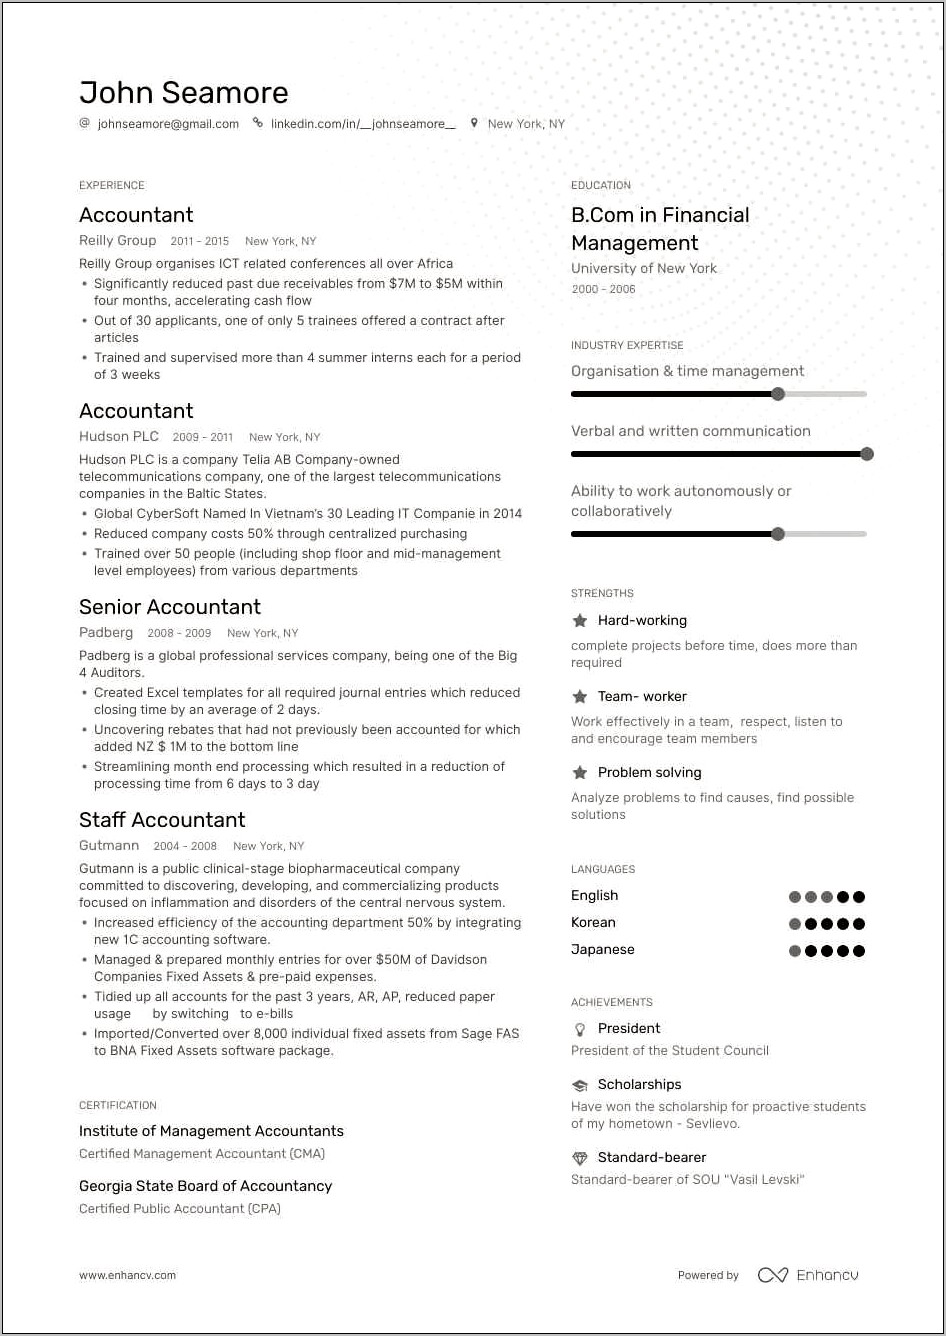 Cpa Candidate Career Management Center Resume Writing